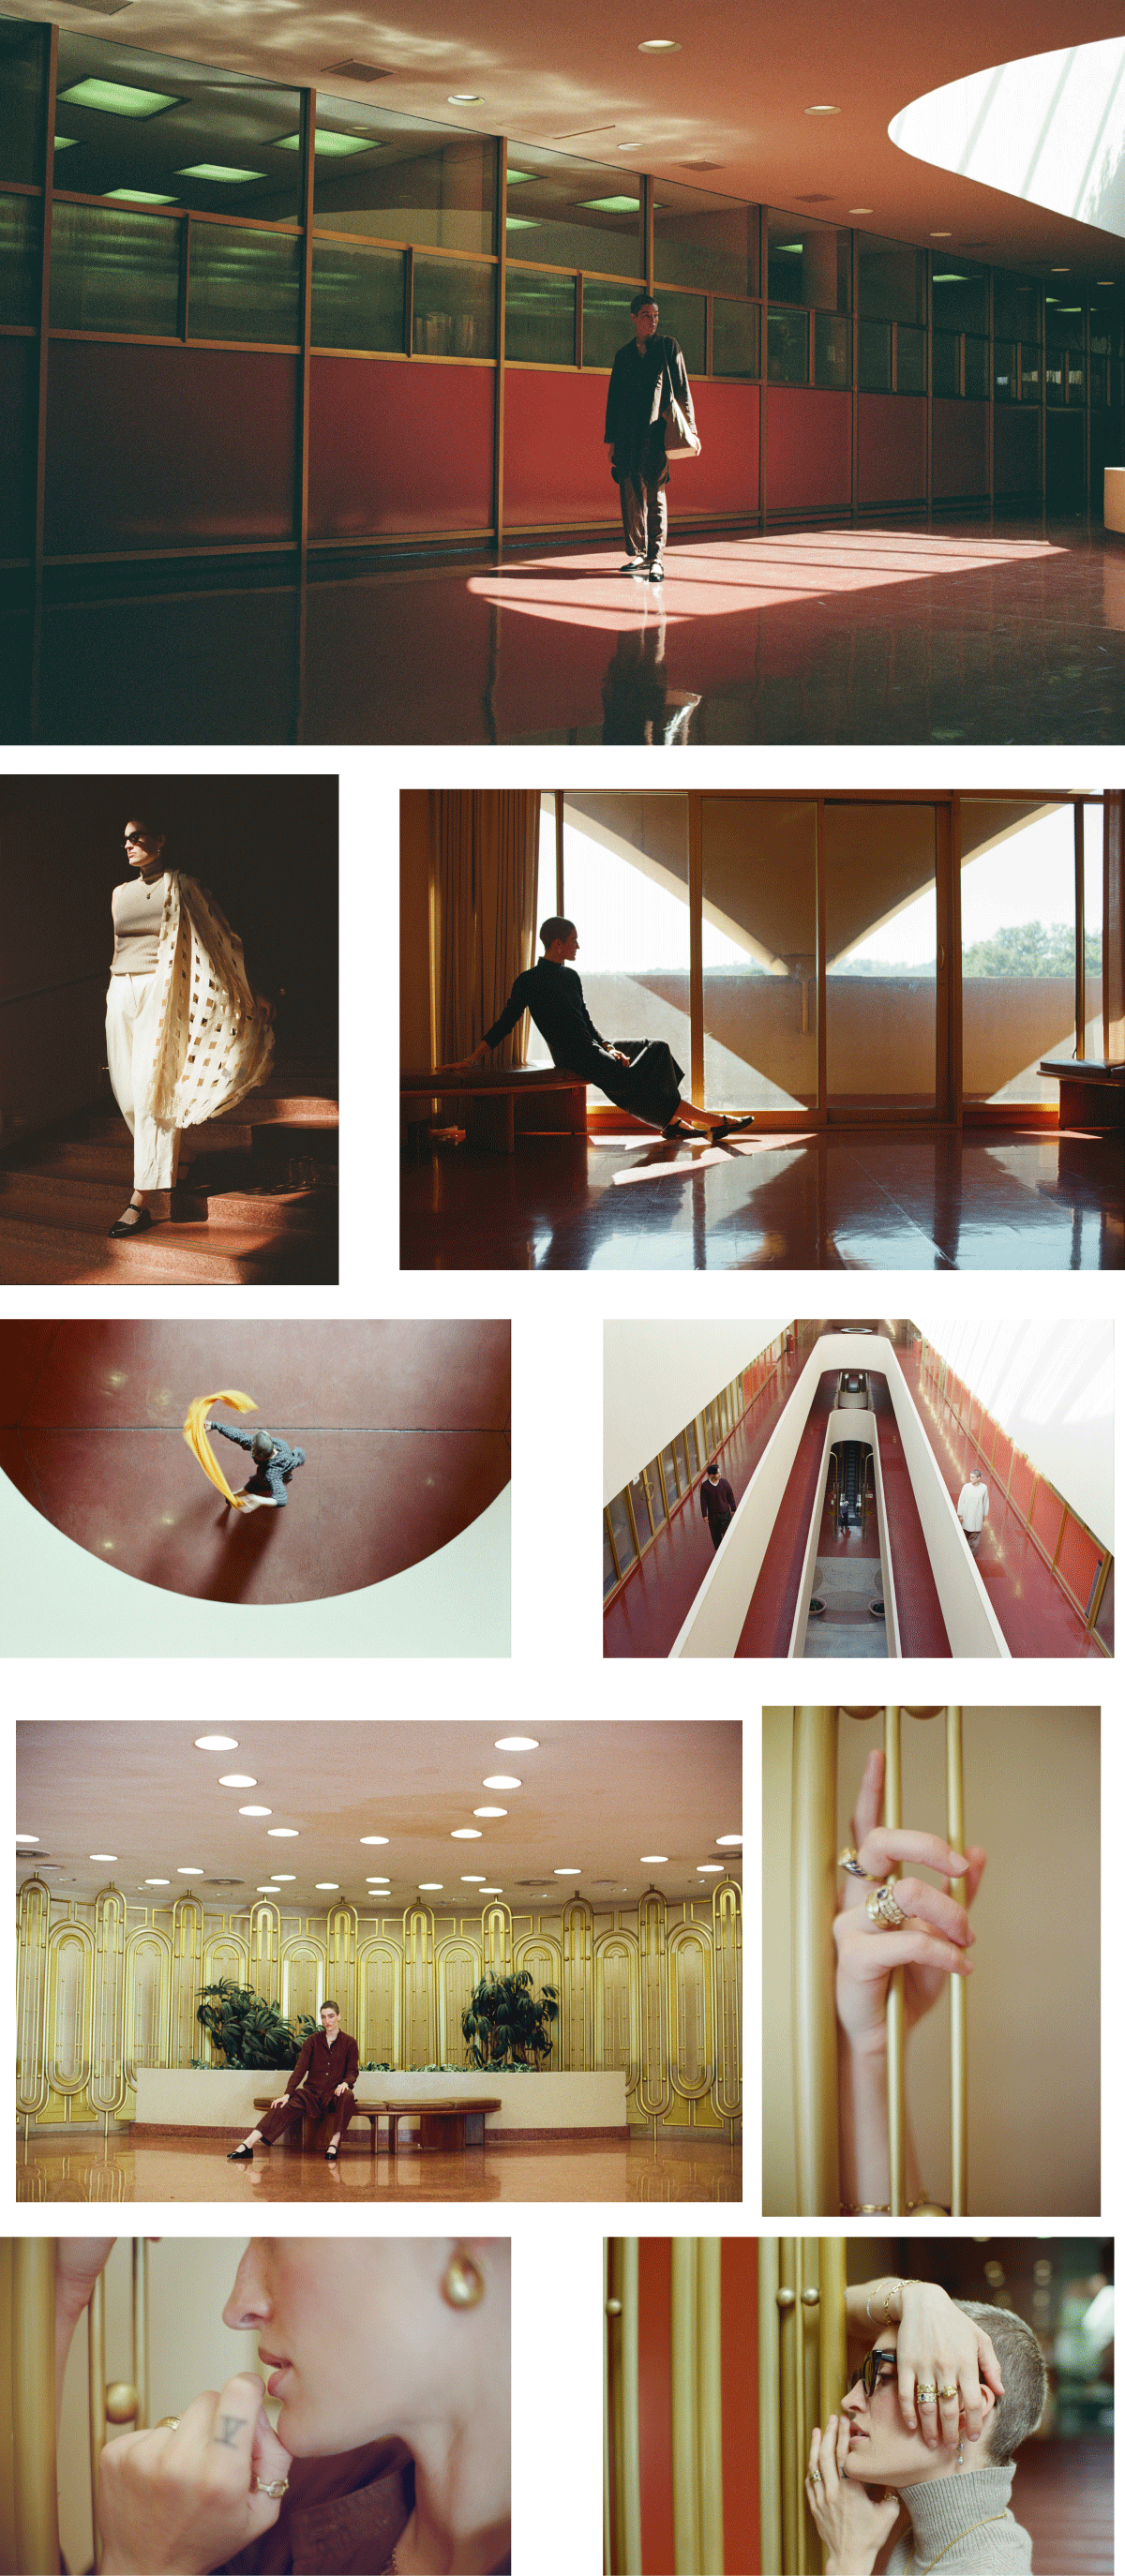 AW23 Editorial shoot at the Marin Civic Center by Allen Danze for Reliquary